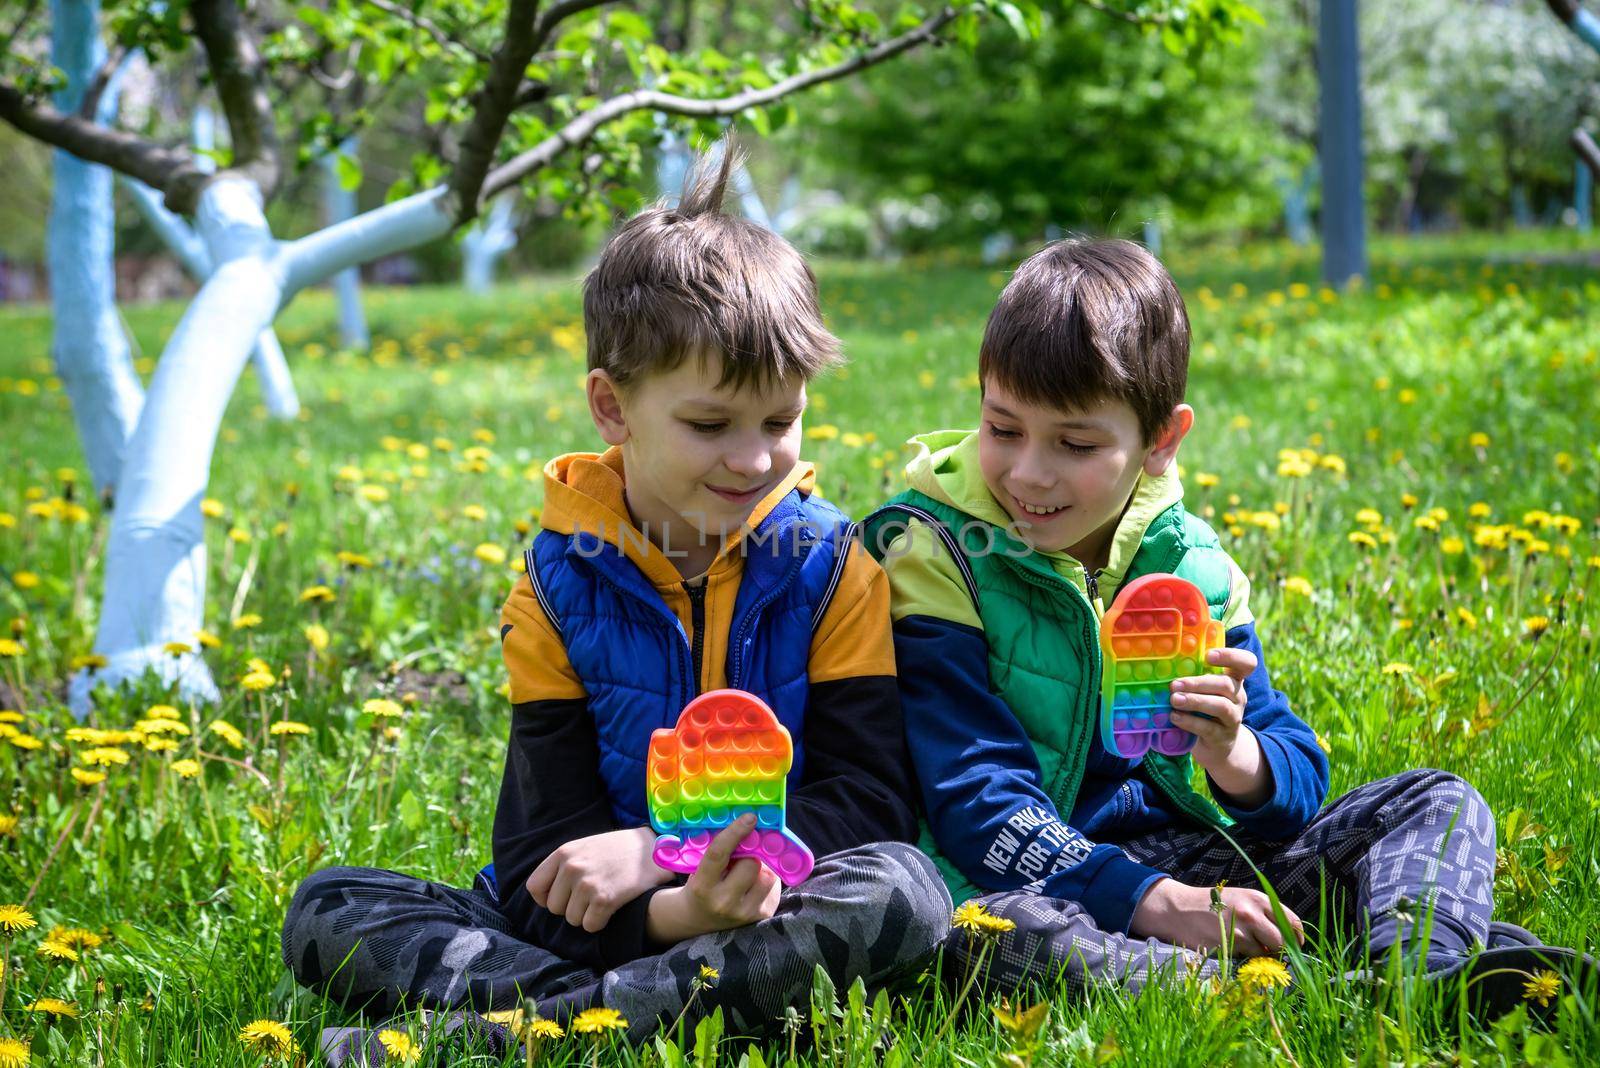 children playing with colorful toys Pop It. Boys on vacation. Tired of games, relaxing on the grass. Summer time for children, two boys friends at reboot together by Kobysh